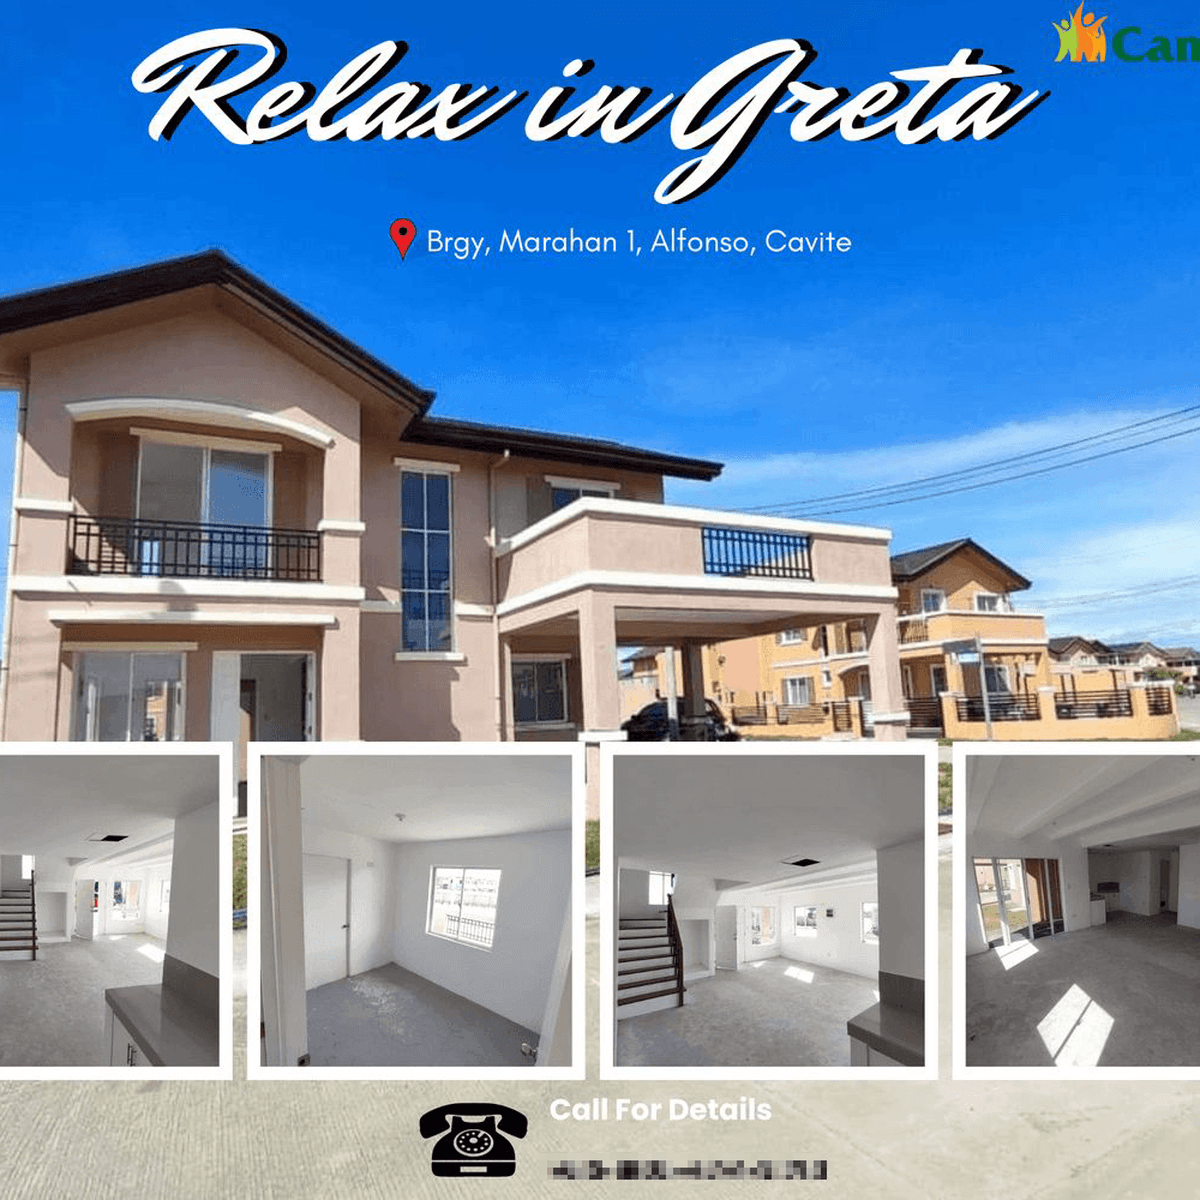 5-bedroom House For Sale in Alfonso Cavite